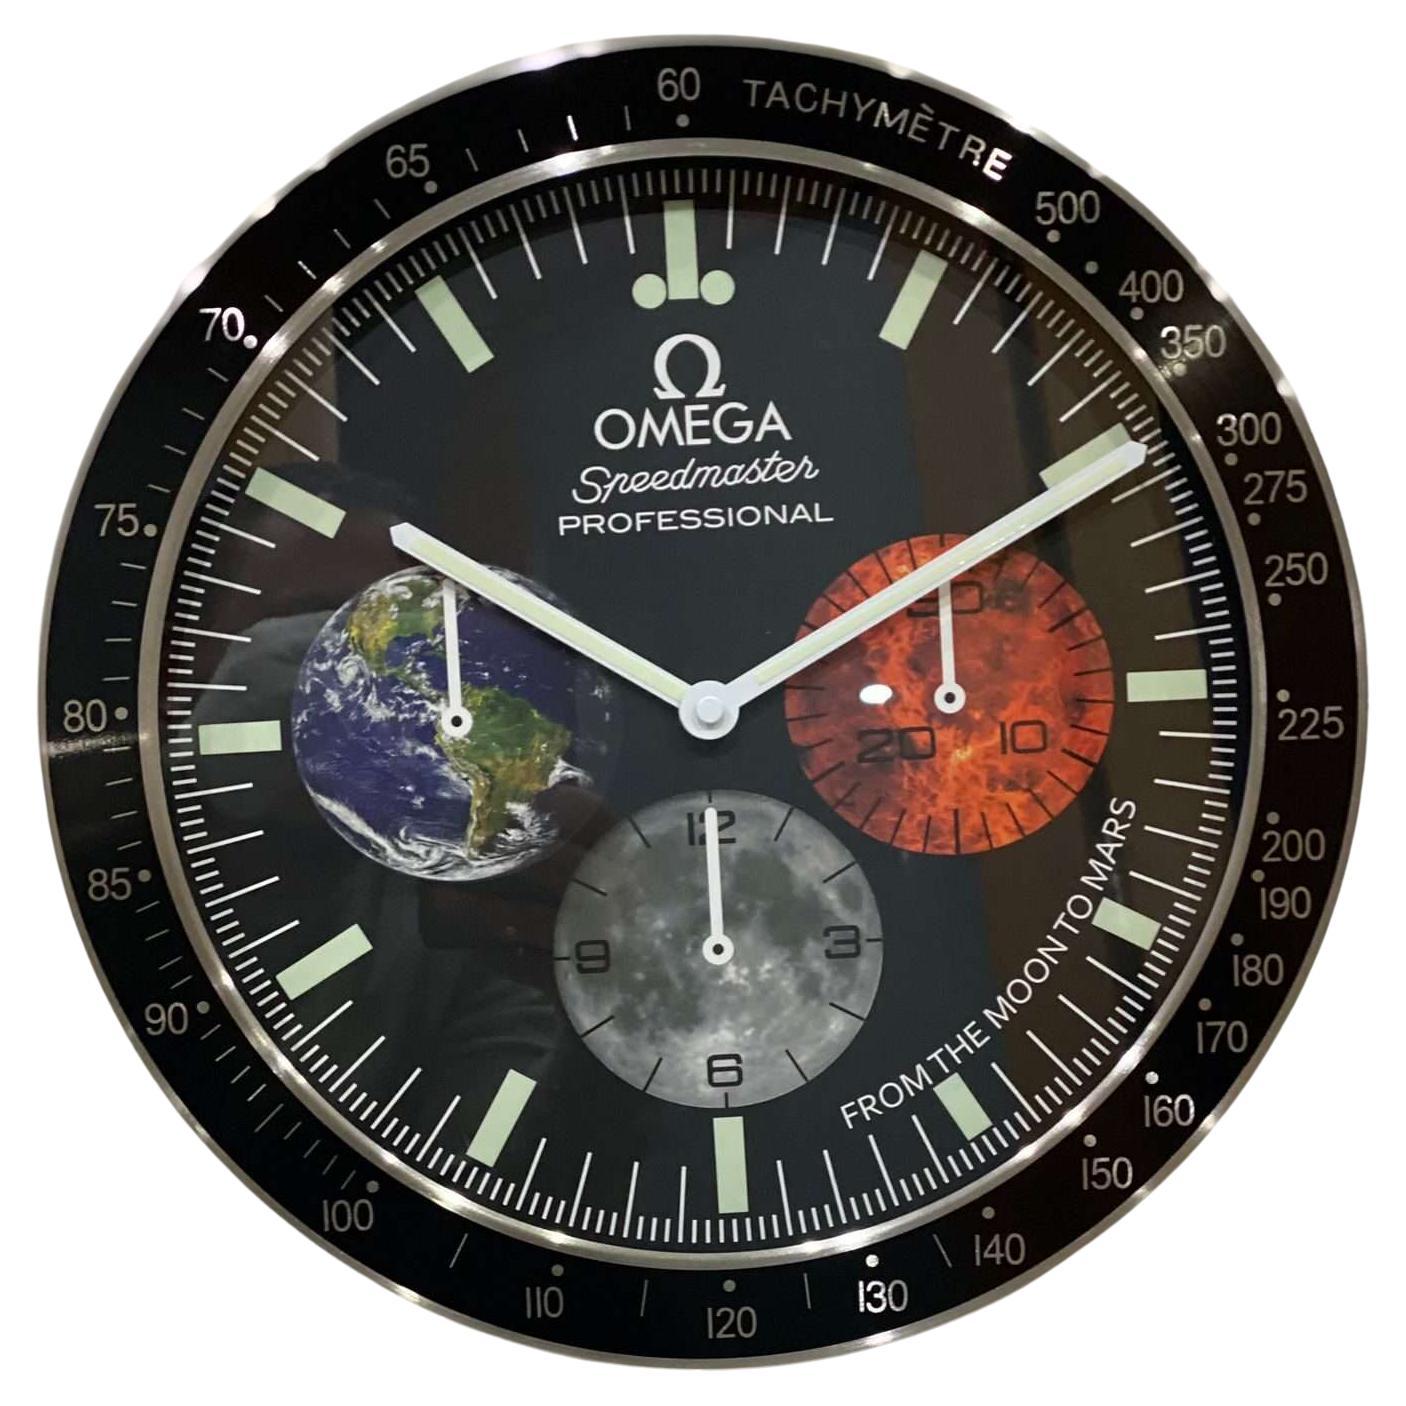 Omega Speedmaster Professional Officially Certified Wall Clock 